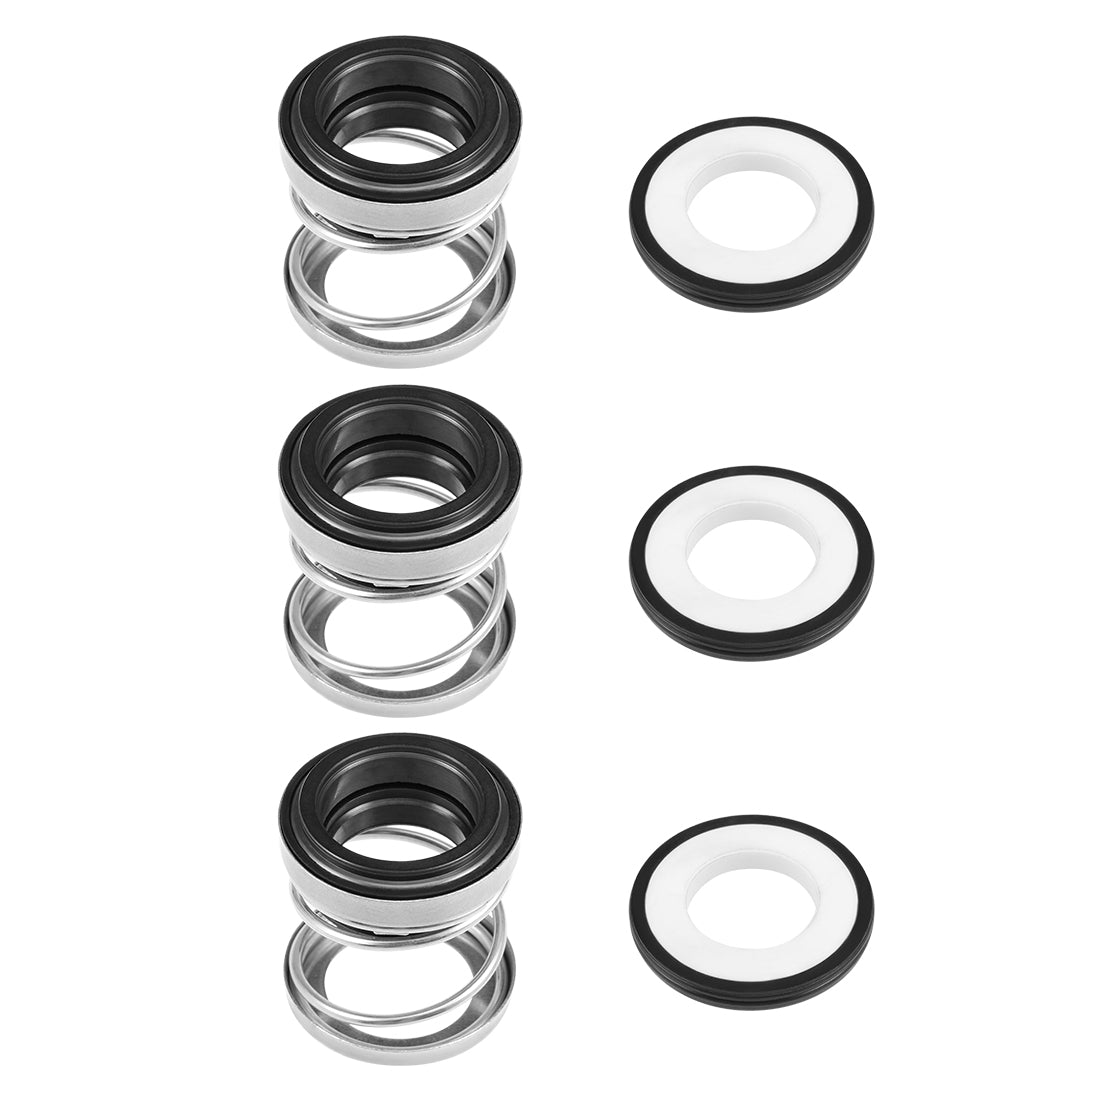 uxcell Uxcell Mechanical Shaft Seal Replacement for Pool Spa Pump 3pcs 108-19